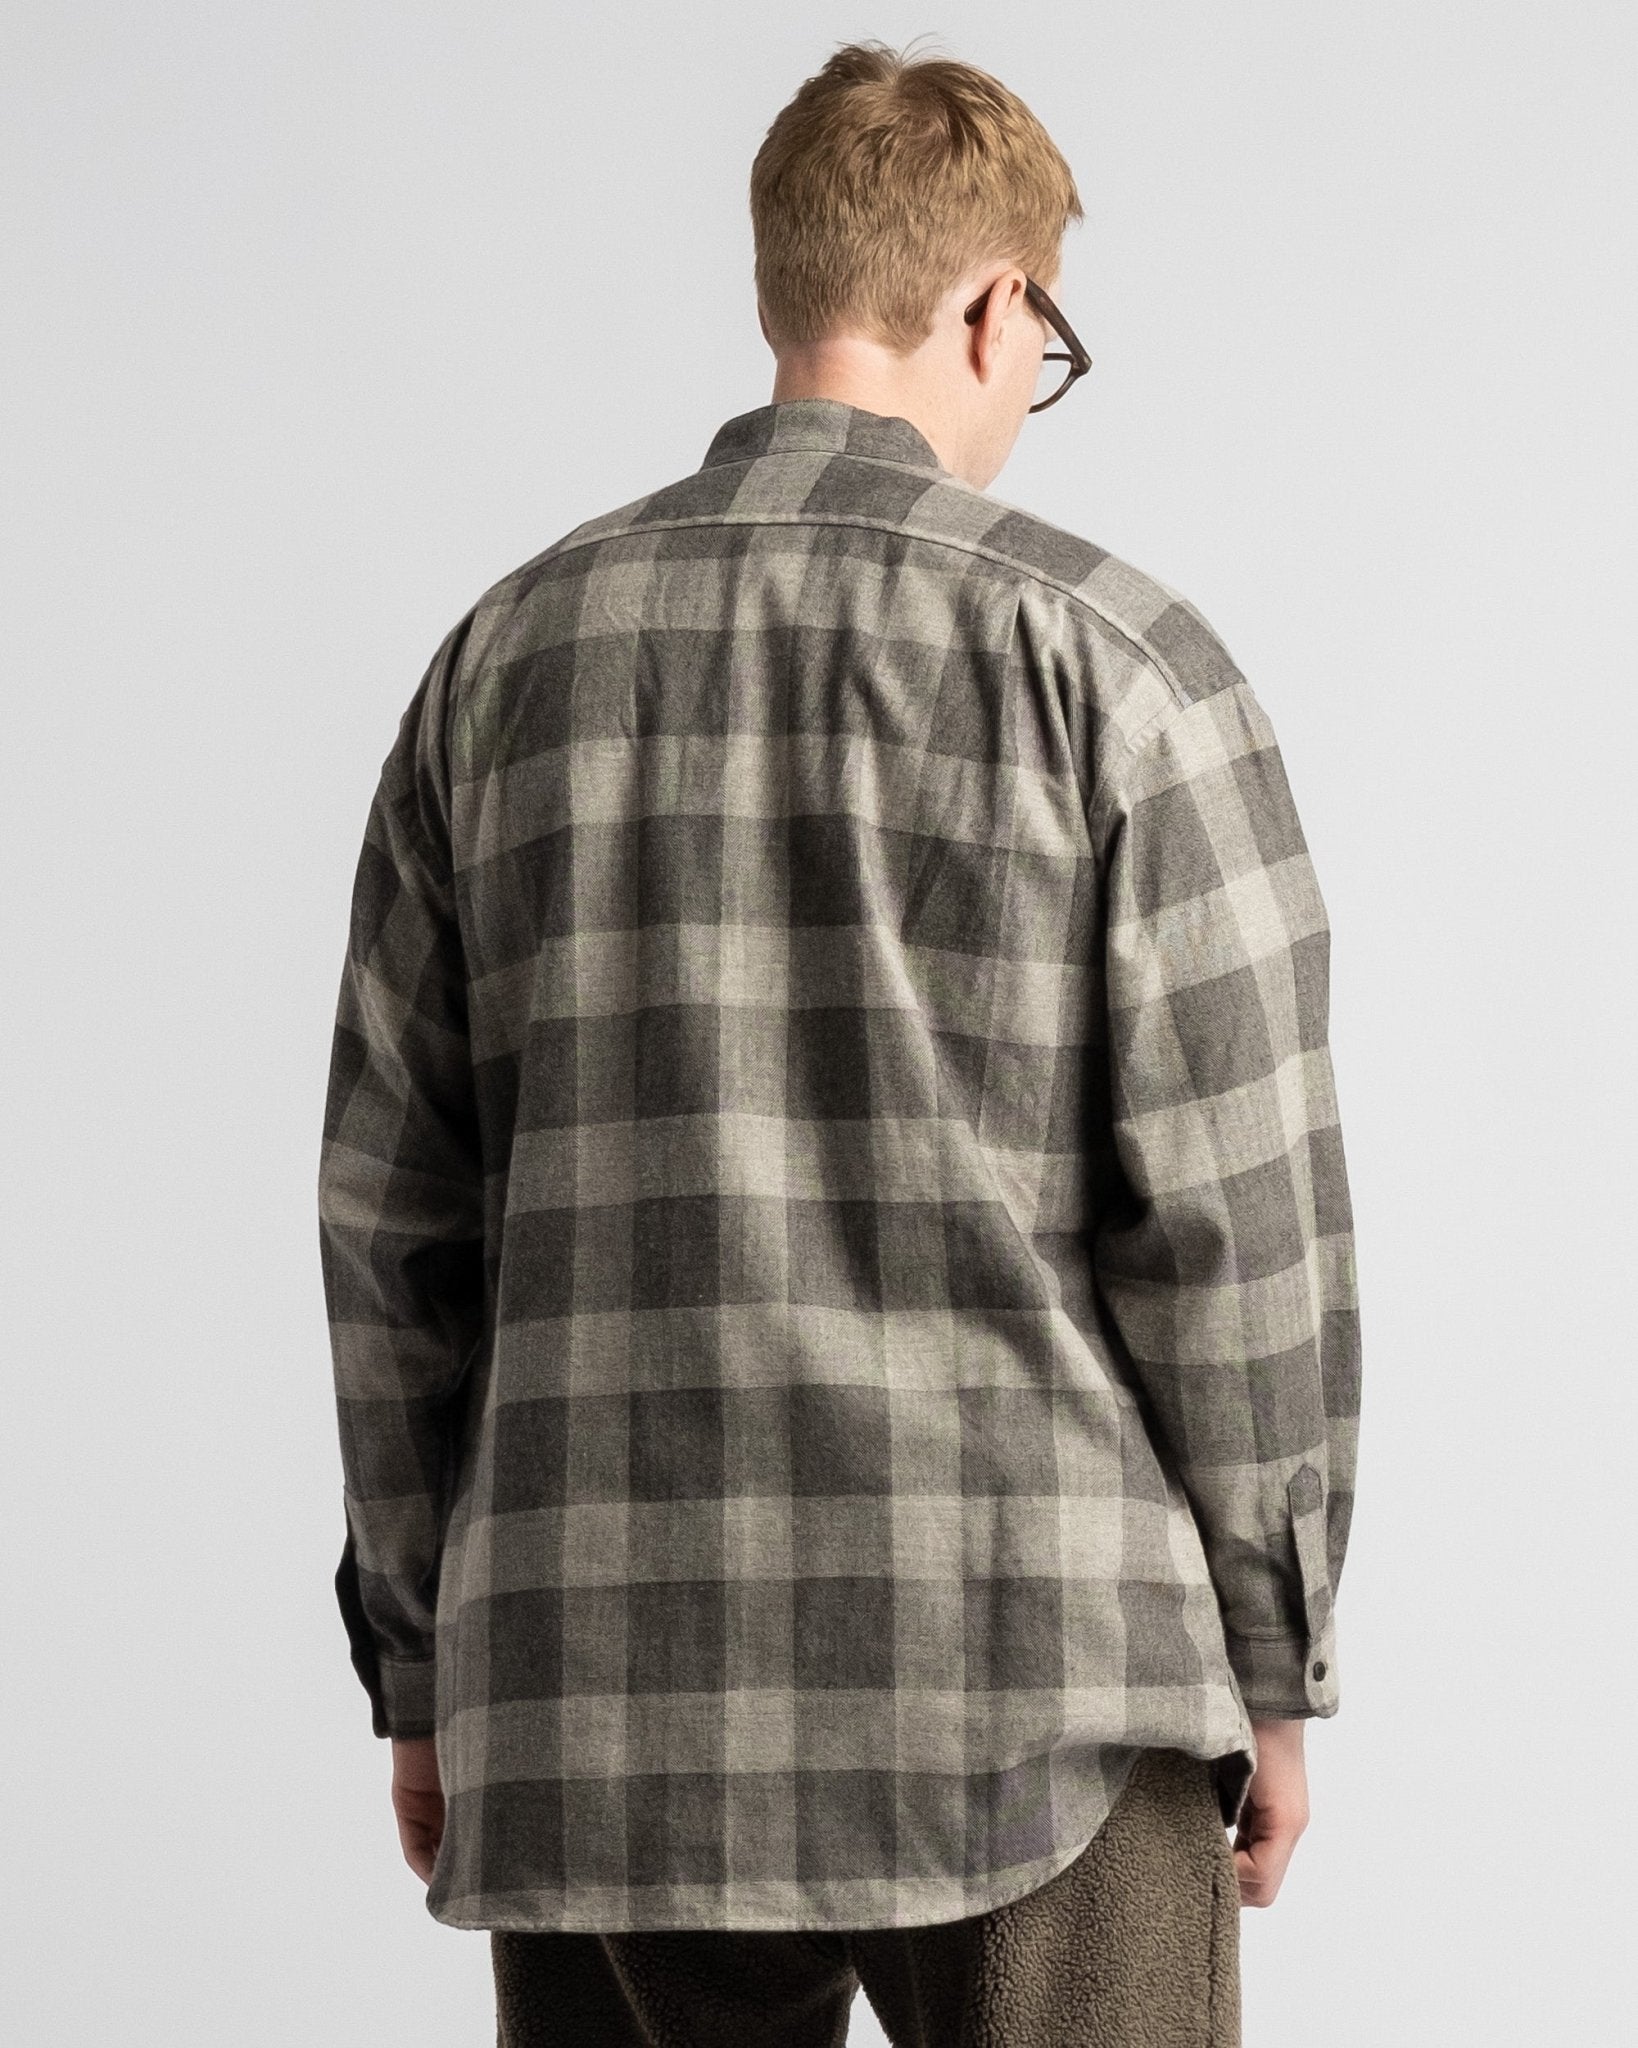 Loose Fit Stand Collar Shirt Grey Check 160 - Meadow